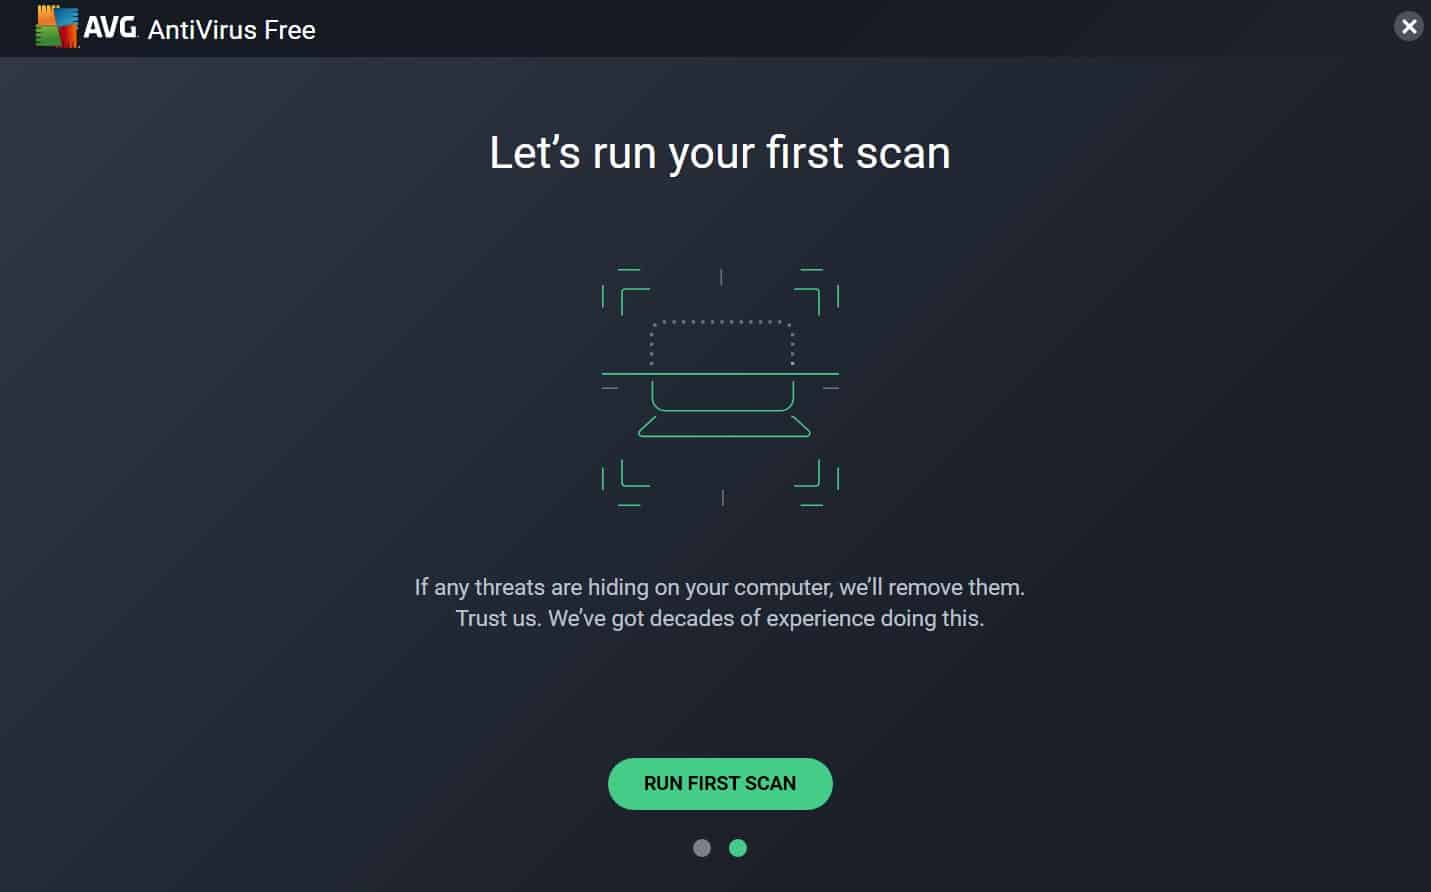 Run an antivirus scan using a reliable antivirus software.
Perform a full system scan to detect and remove any malware or viruses.